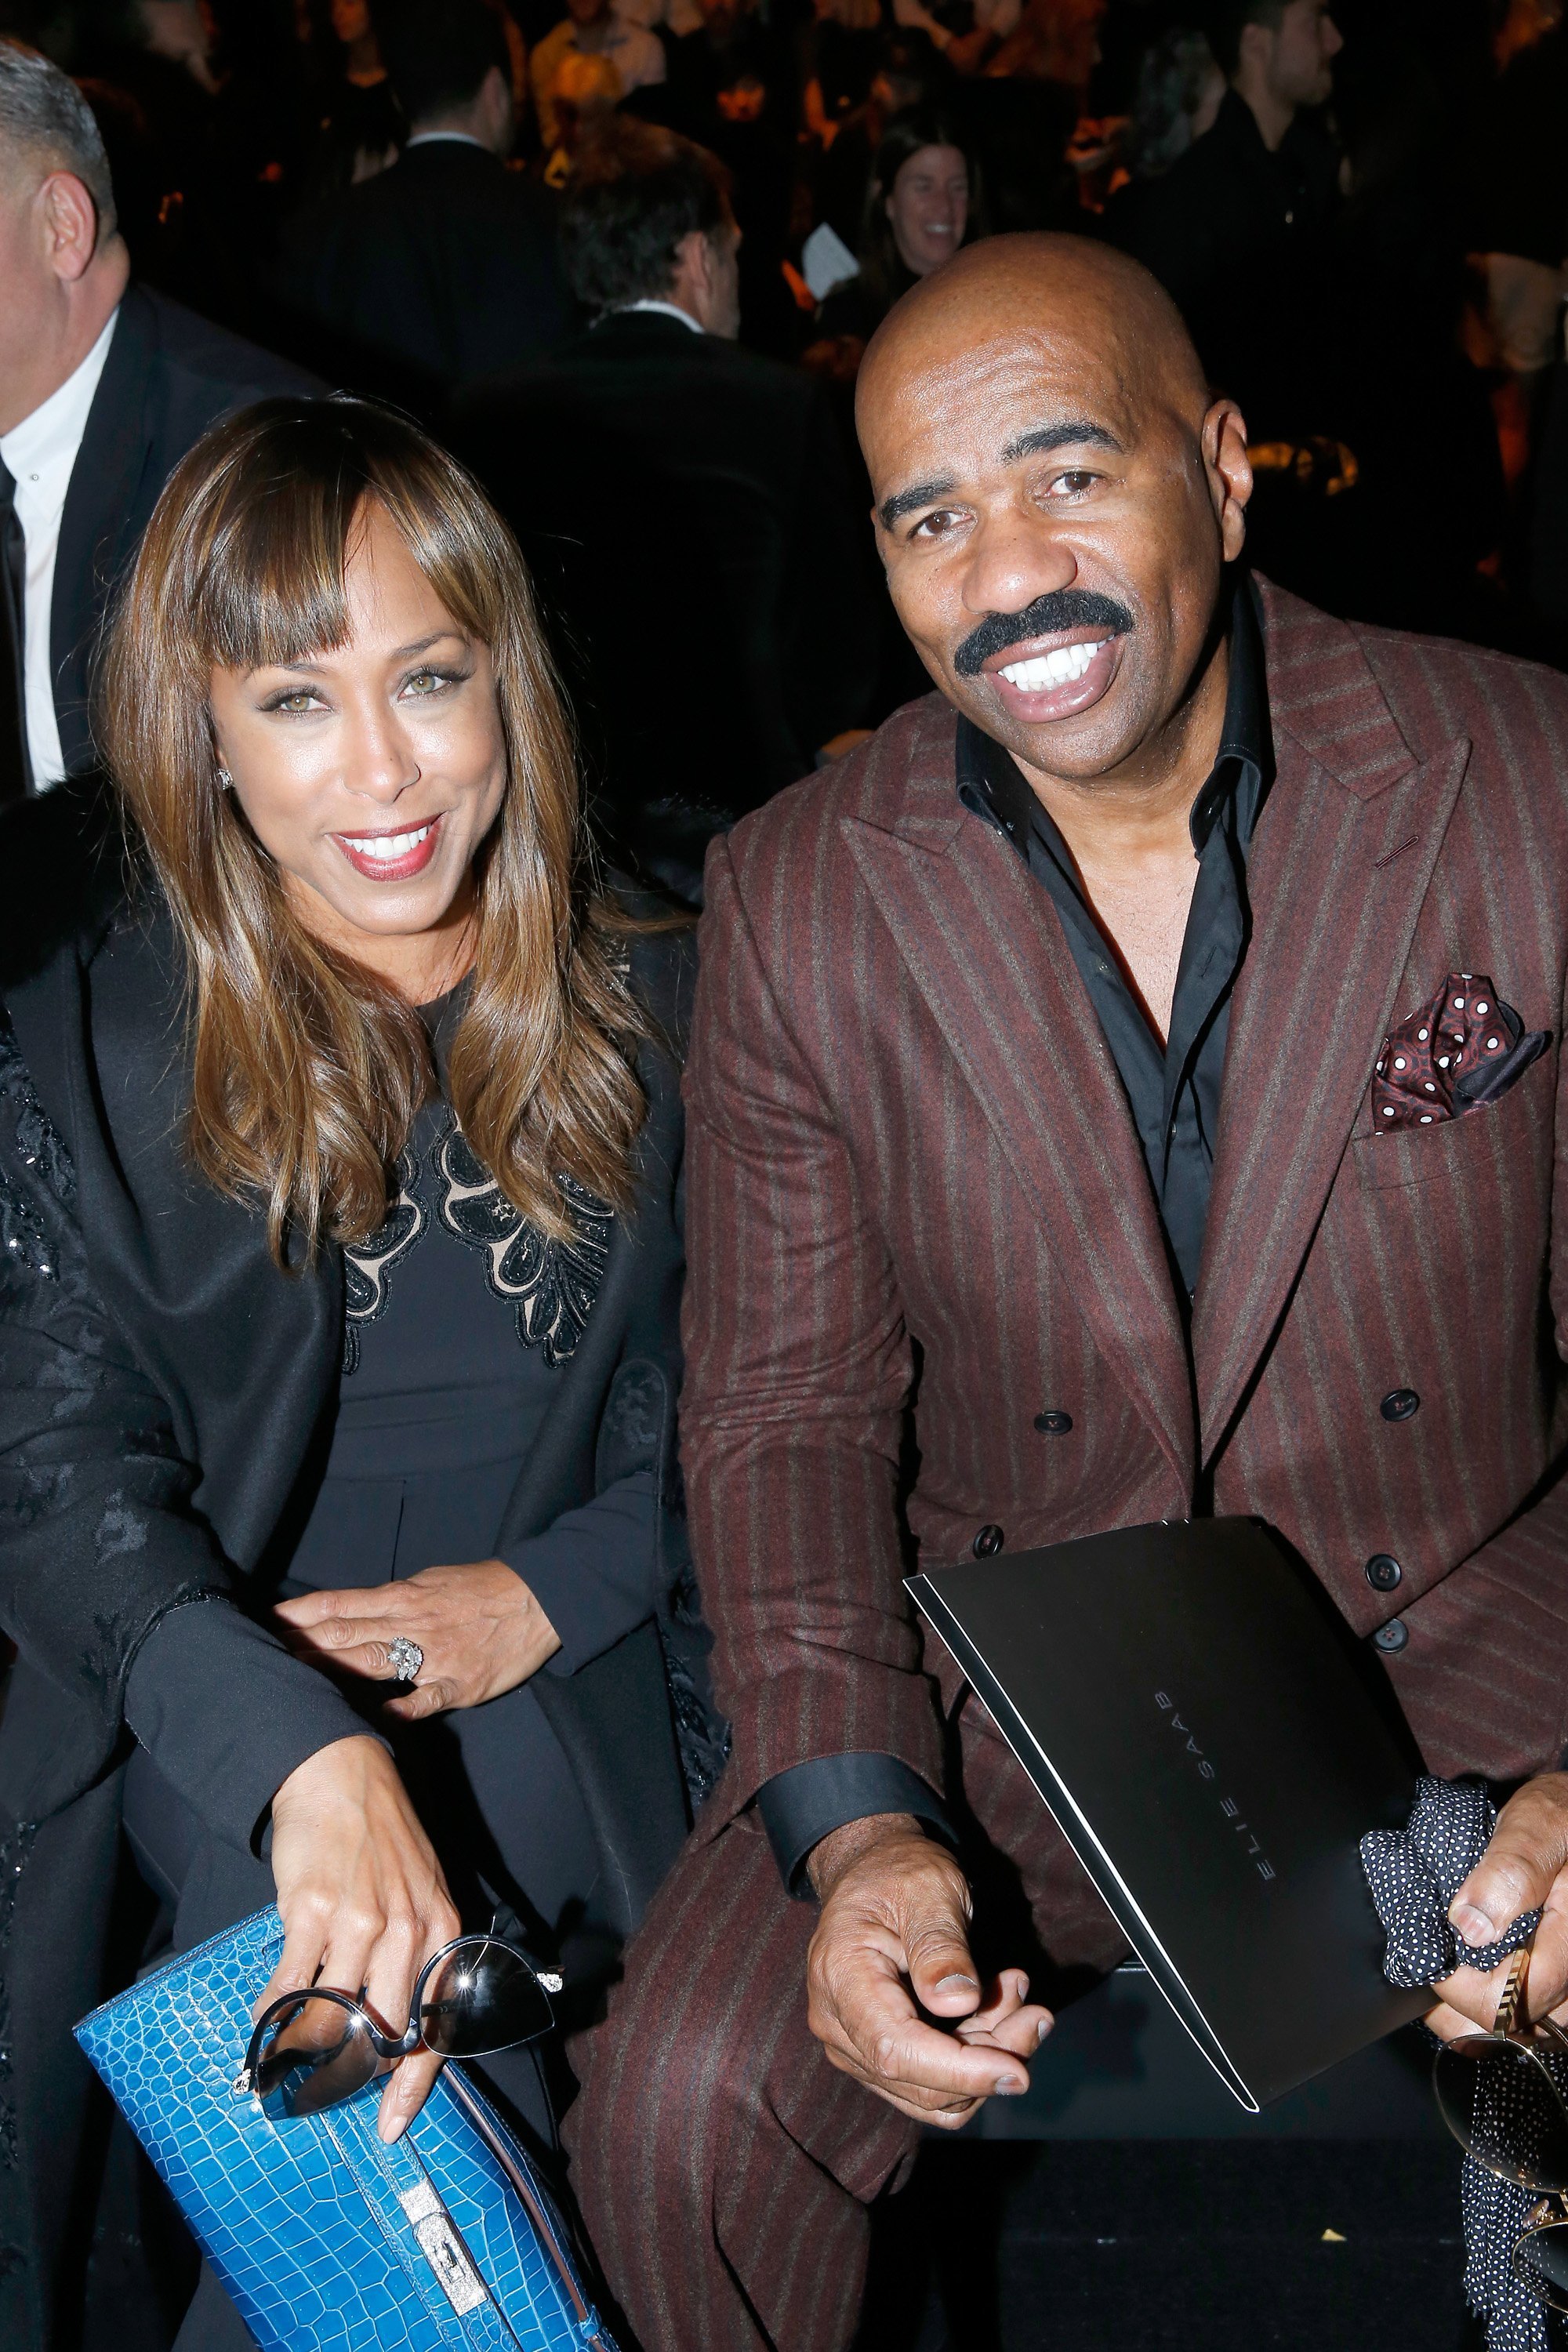 : TV Host Steve Harvey with his wife Marjorie attend the Elie Saab show as part of the Paris Fashion Week Womenswear Spring/Summer 2016 |Photo: Getty Images